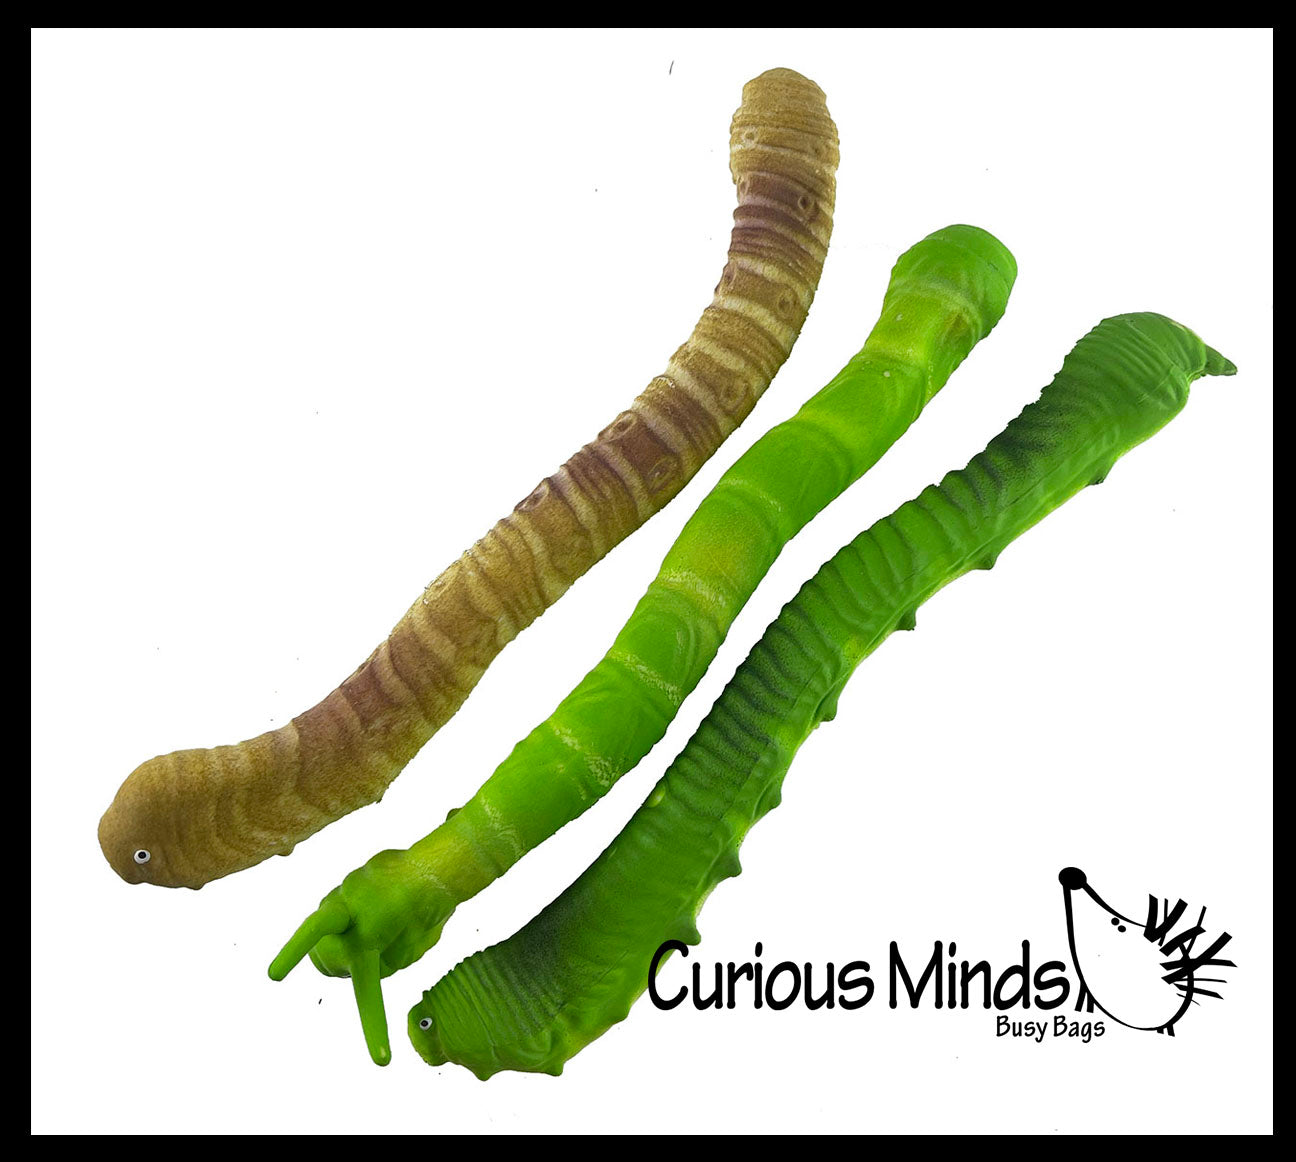 2 Sand Filled Stretchy Caterpillar - Moldable Sensory, Stress, Squeeze  Fidget Toy ADHD Special Needs Soothing Grub Bug (Random Colors)